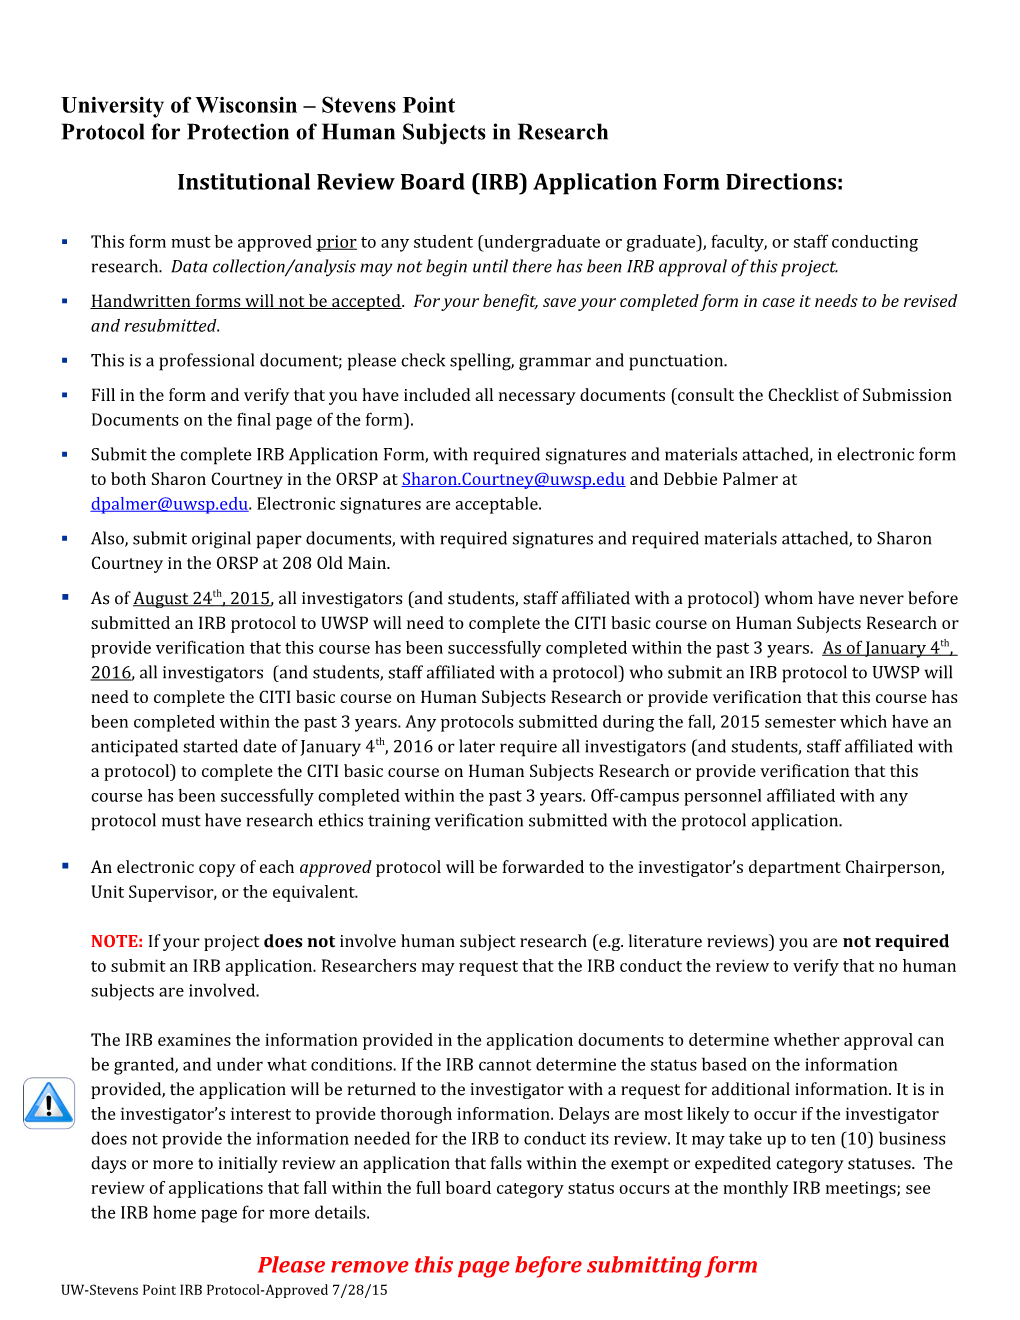 Institutional Review Board (IRB) Application Form Directions